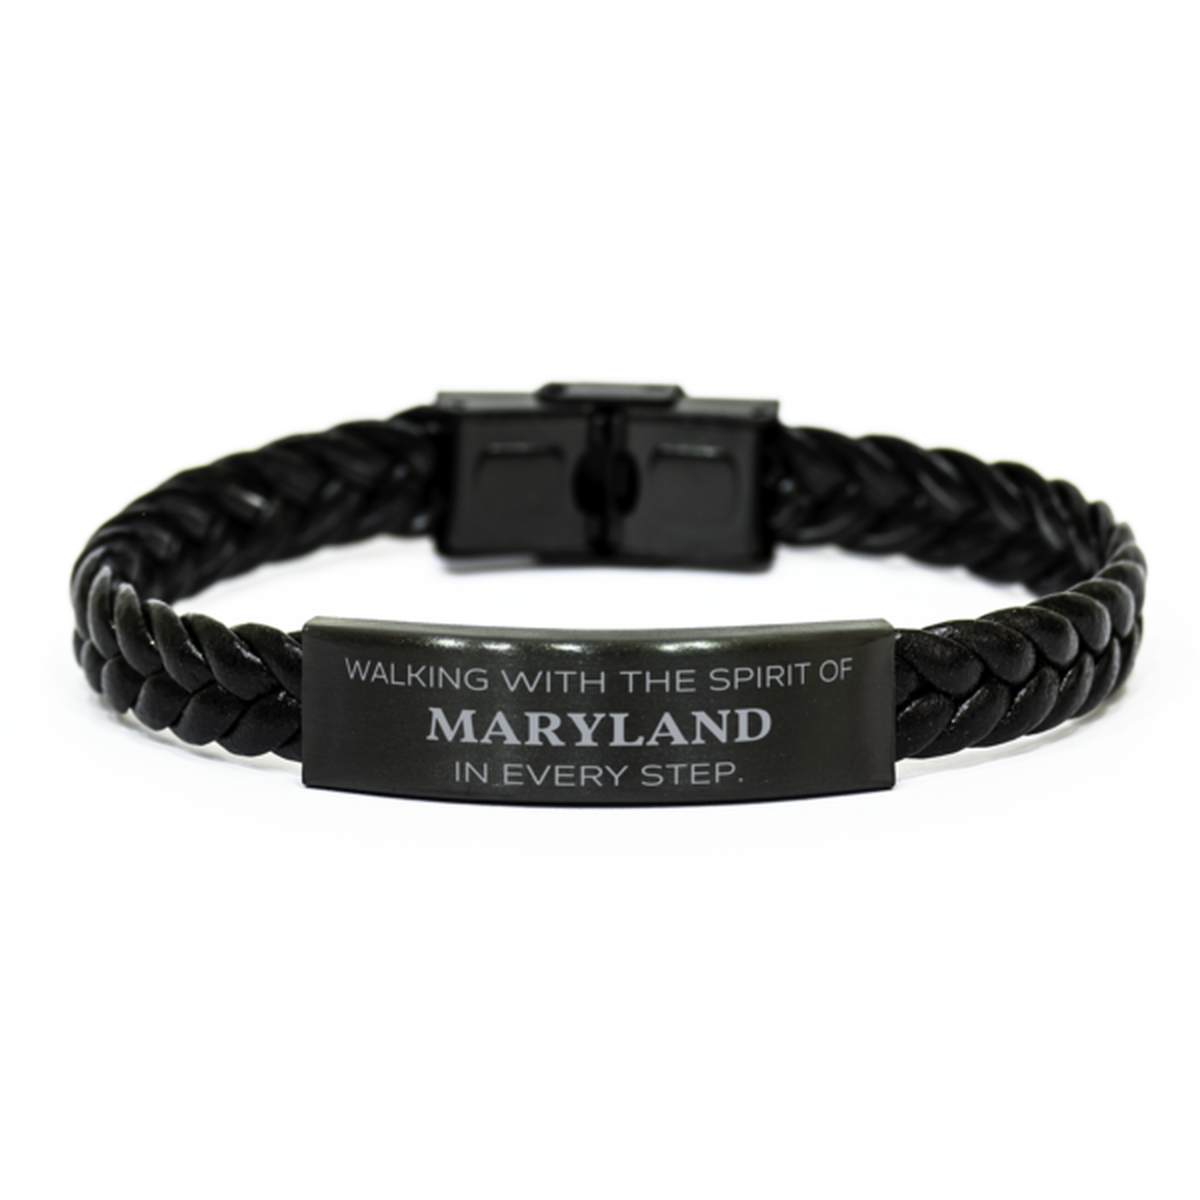 Maryland Gifts, Walking with the spirit, Love Maryland Birthday Christmas Braided Leather Bracelet For Maryland People, Men, Women, Friends